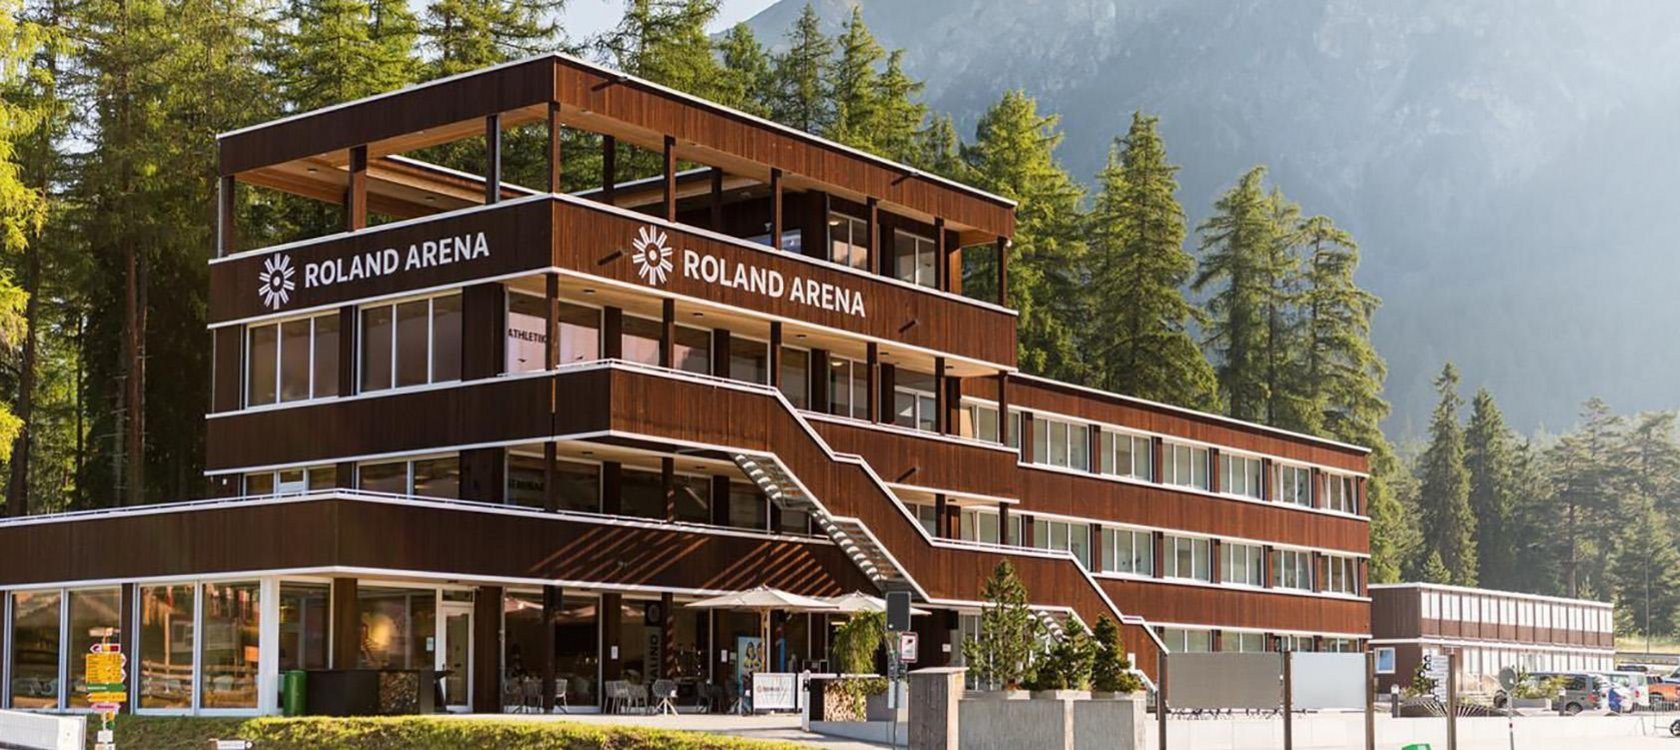 Swiss biathlon and cross-country will  benefit from the opening of a new ski track at Roland Arena ©Swiss Ski